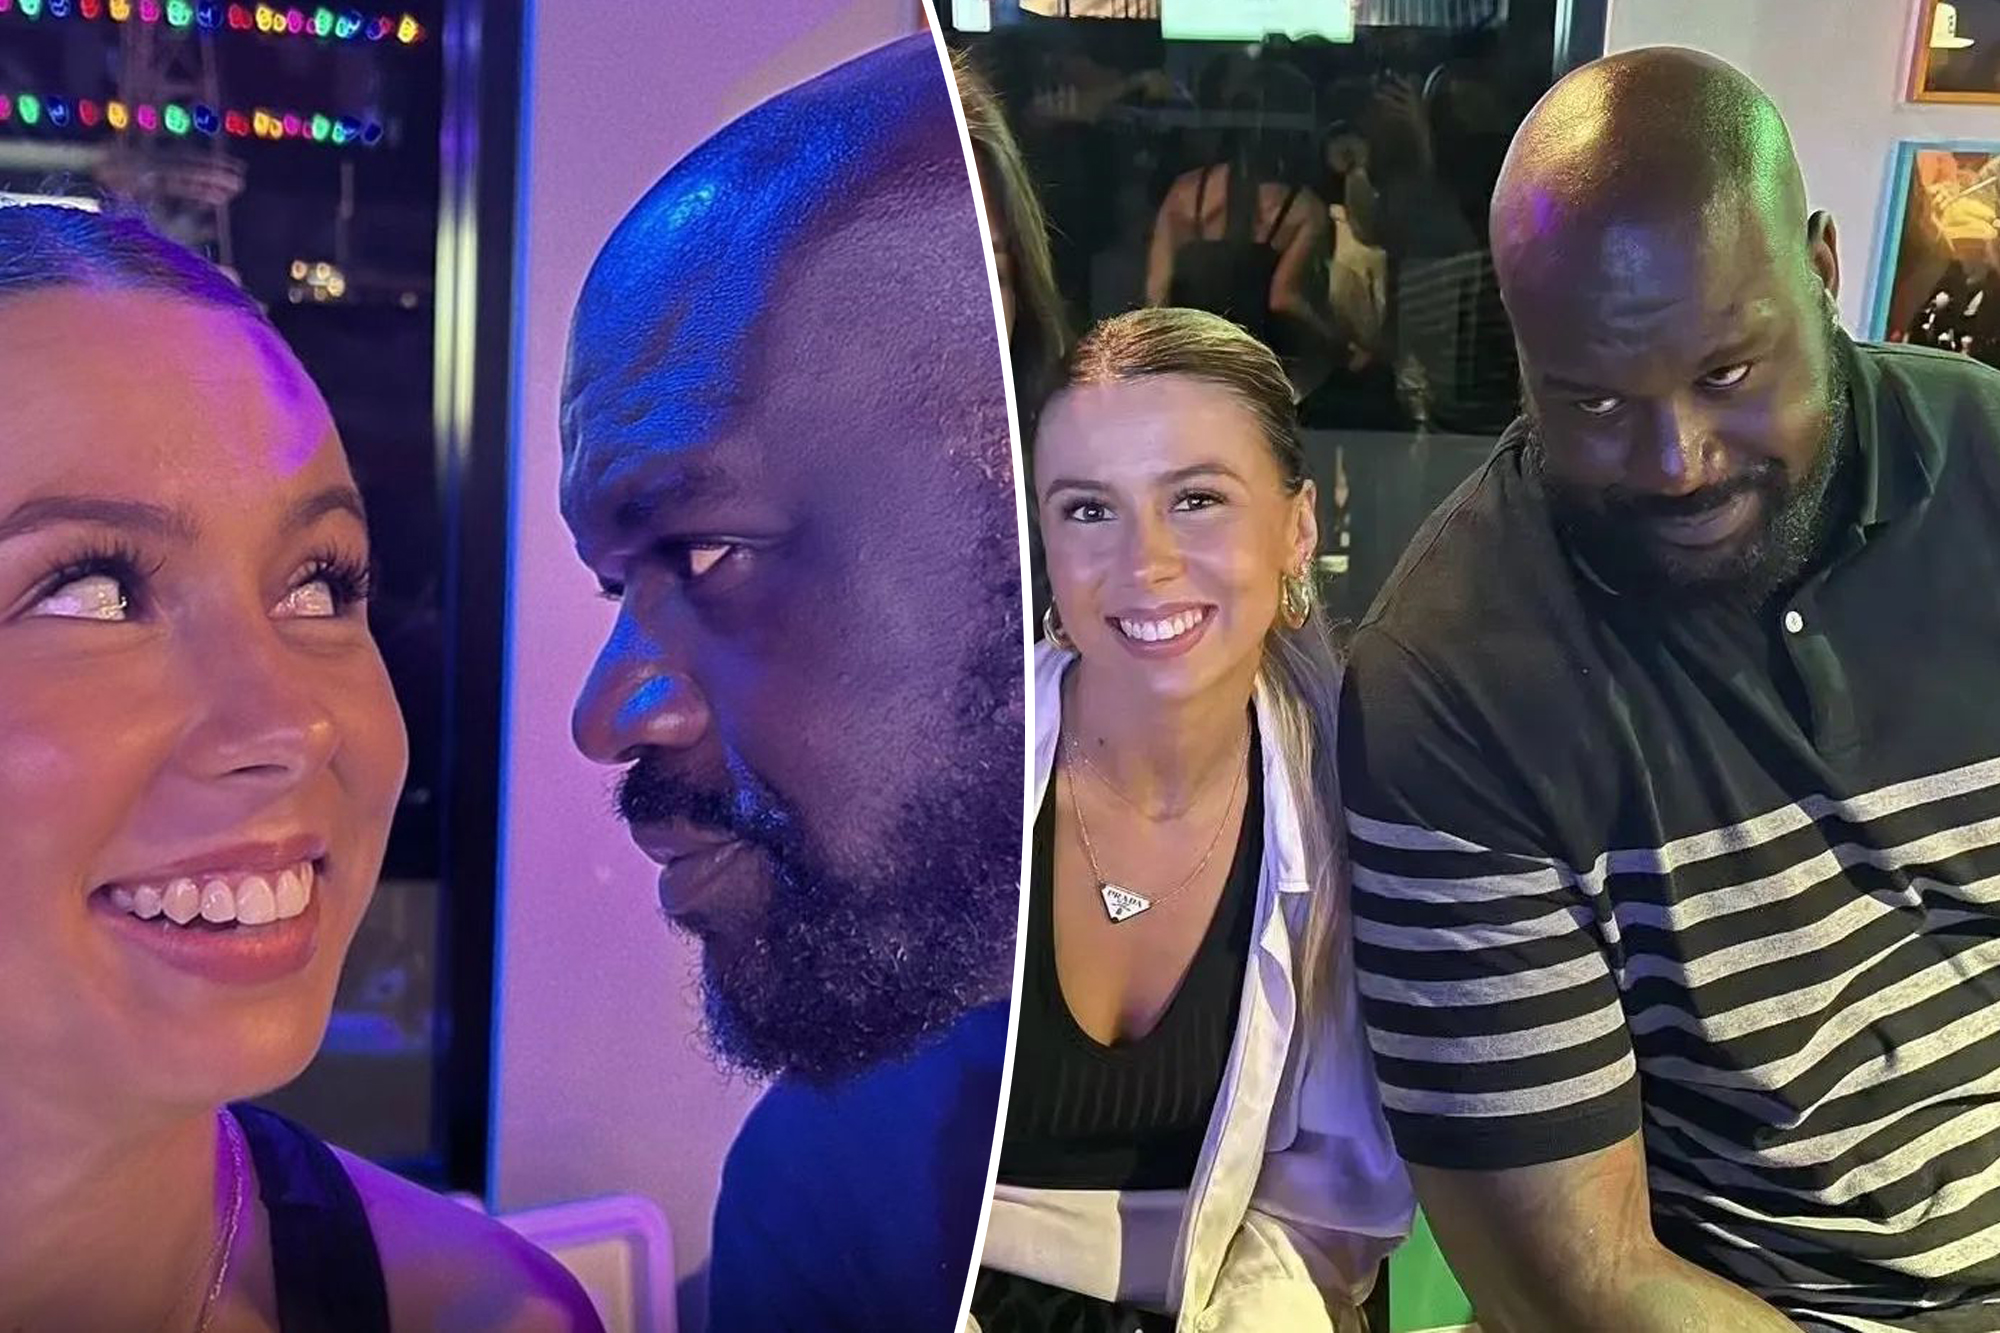 Shaquille O'Neal Rocks Out with 'Hawk Tuah' Star in Nashville - Wild Night Unleashed!